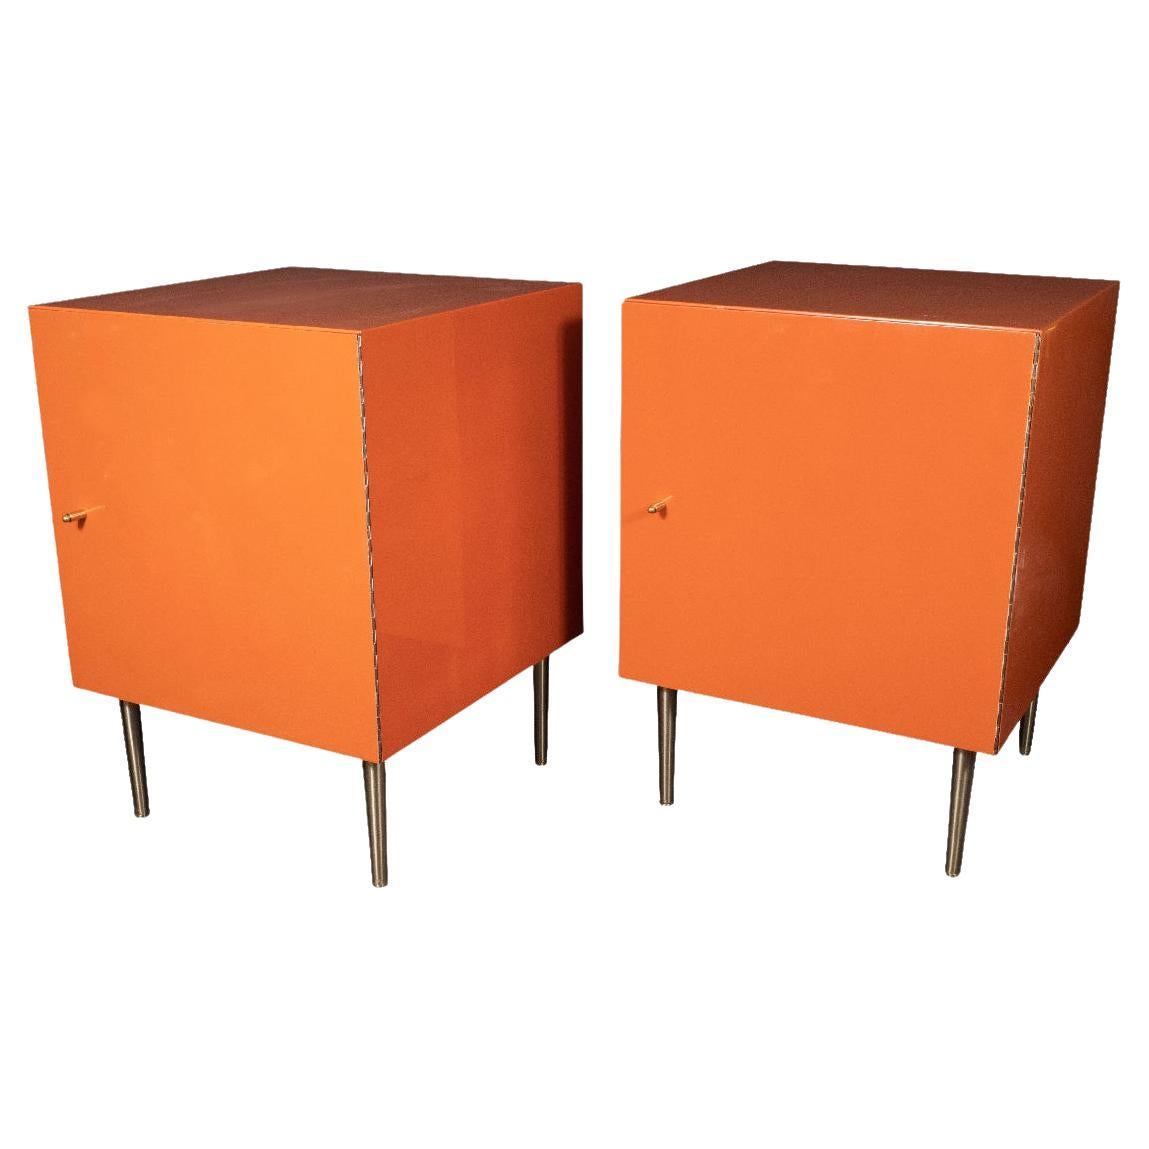 Pair of Mid-Century Modern Cubic Orange Cabinets For Sale